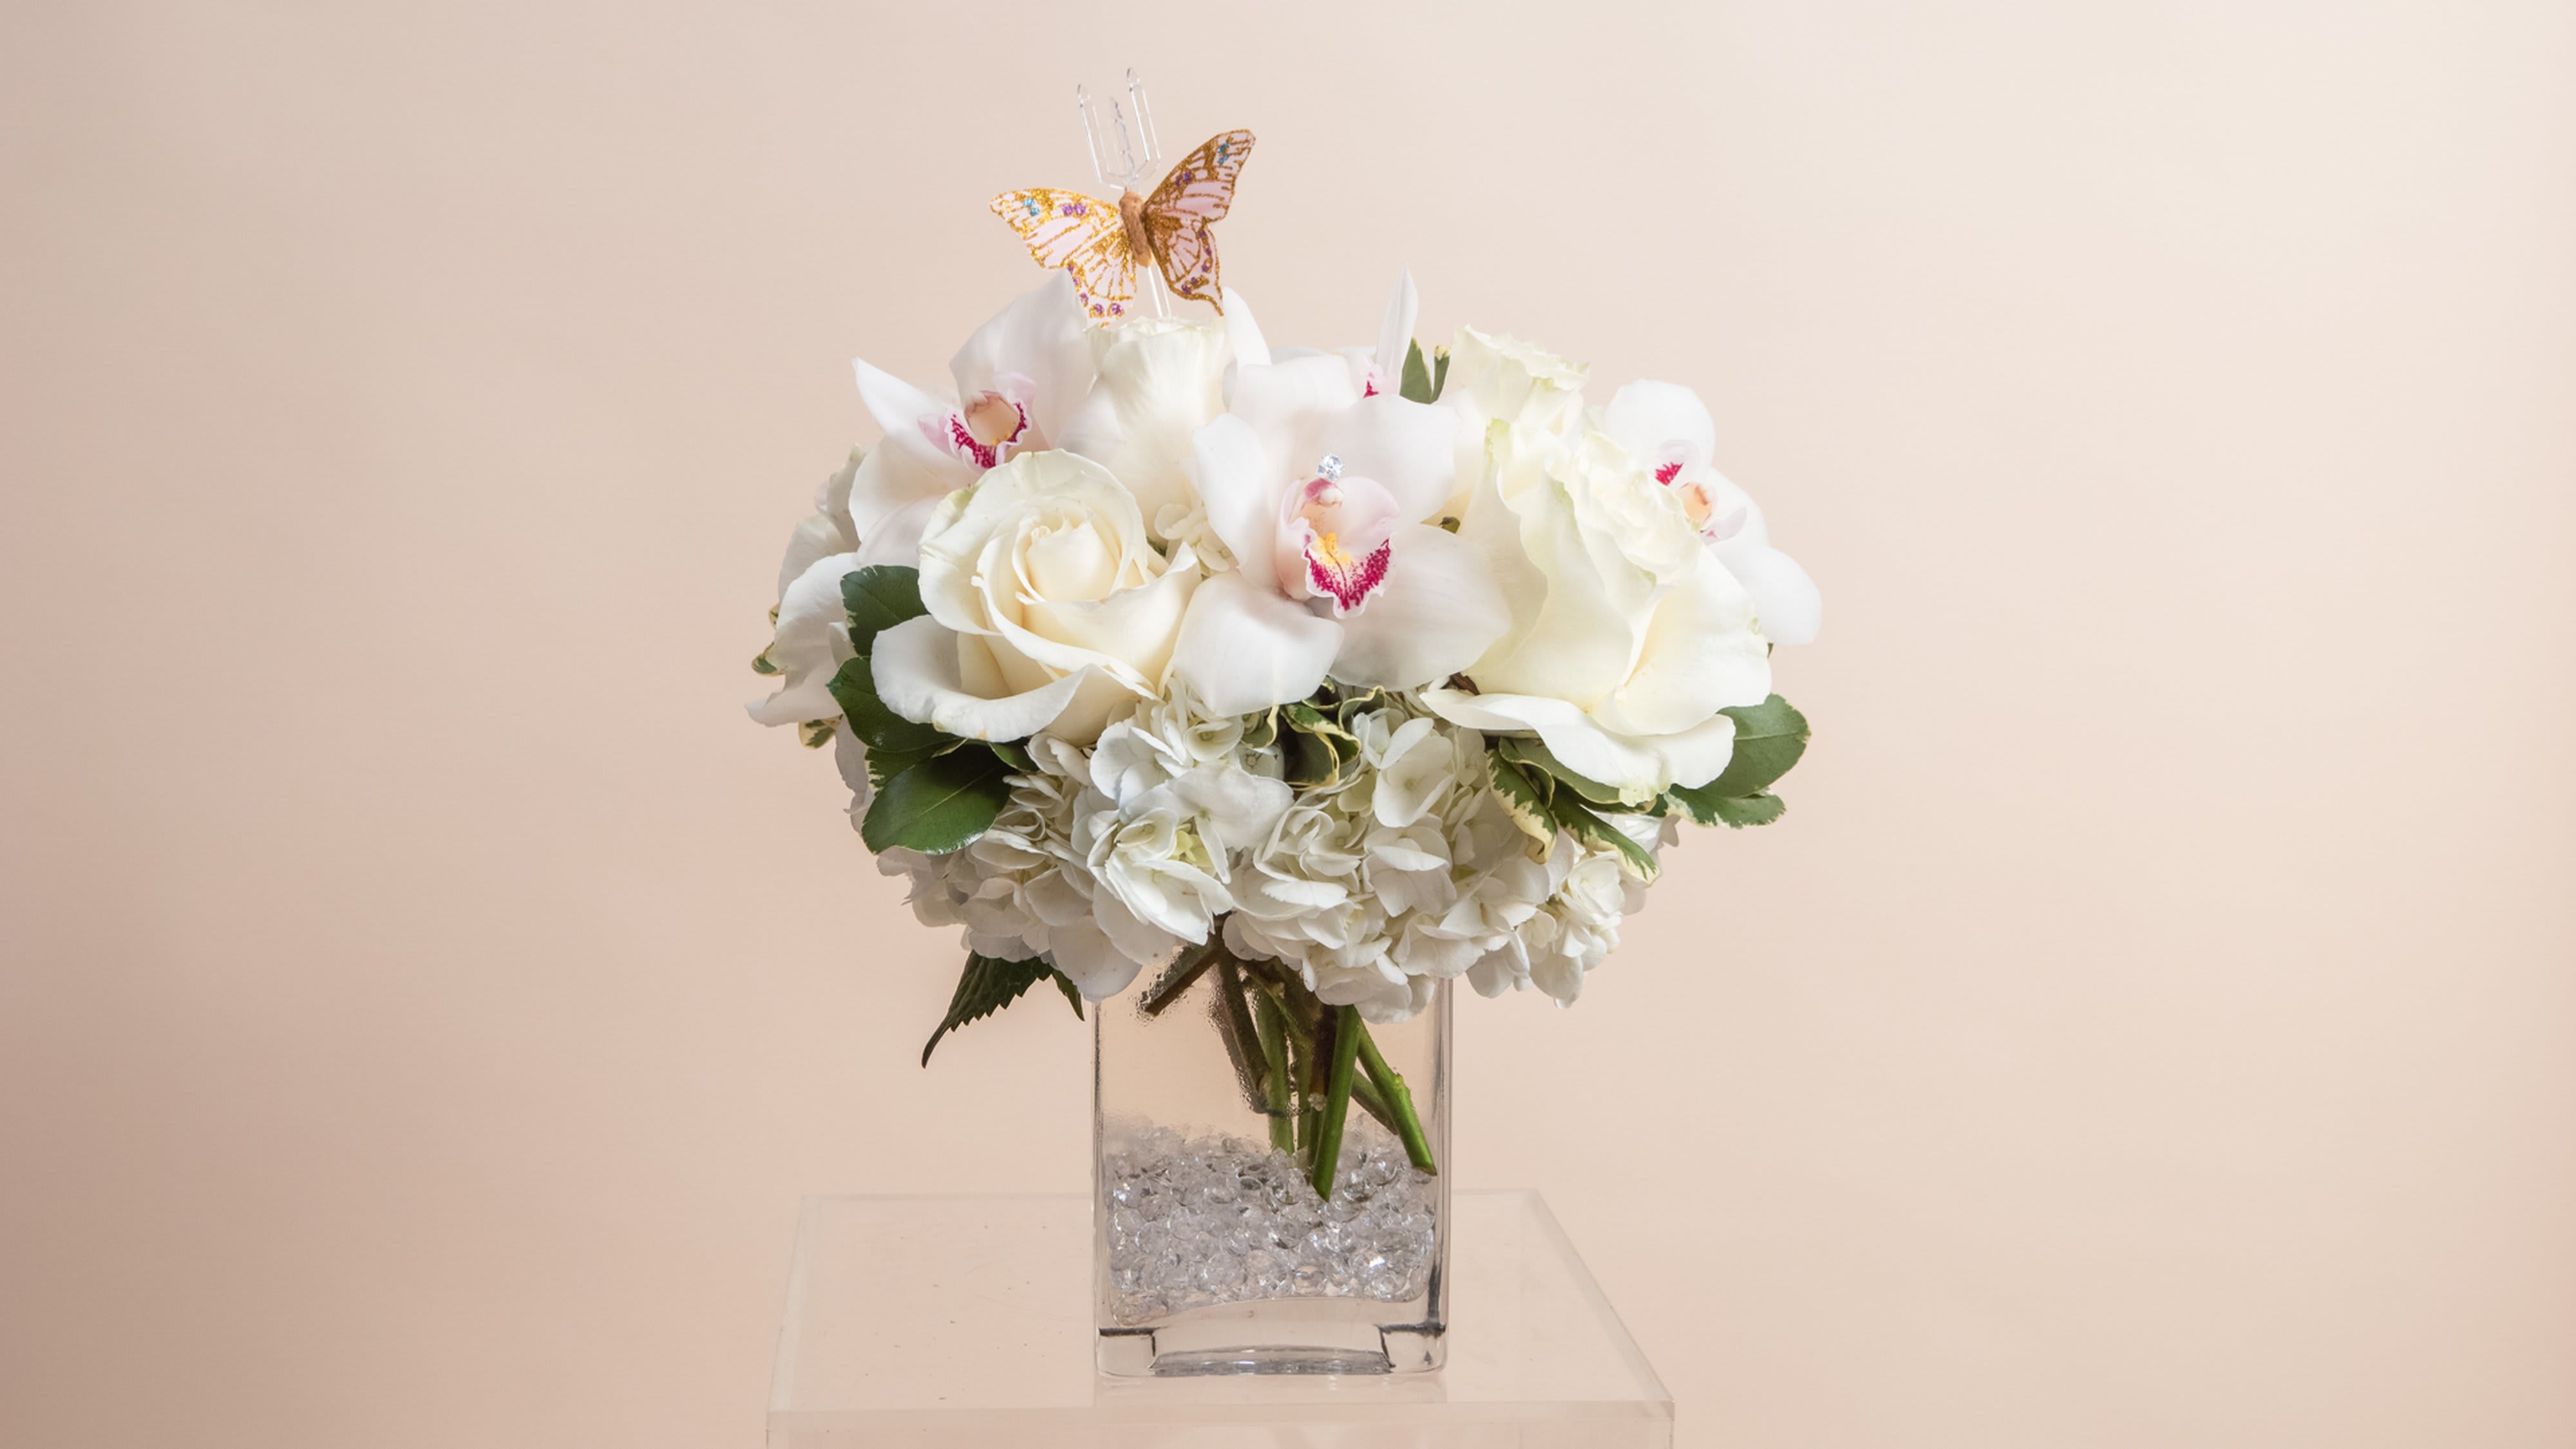 Darla - White ( Pink Orchids, Roses And Hydrangeas ) - One of our most popular designs, now available with white tones! This cute white bundle is perfect for so many occasions!  Roses, cymbidium Orchids, Lisianthus and hydrangeas